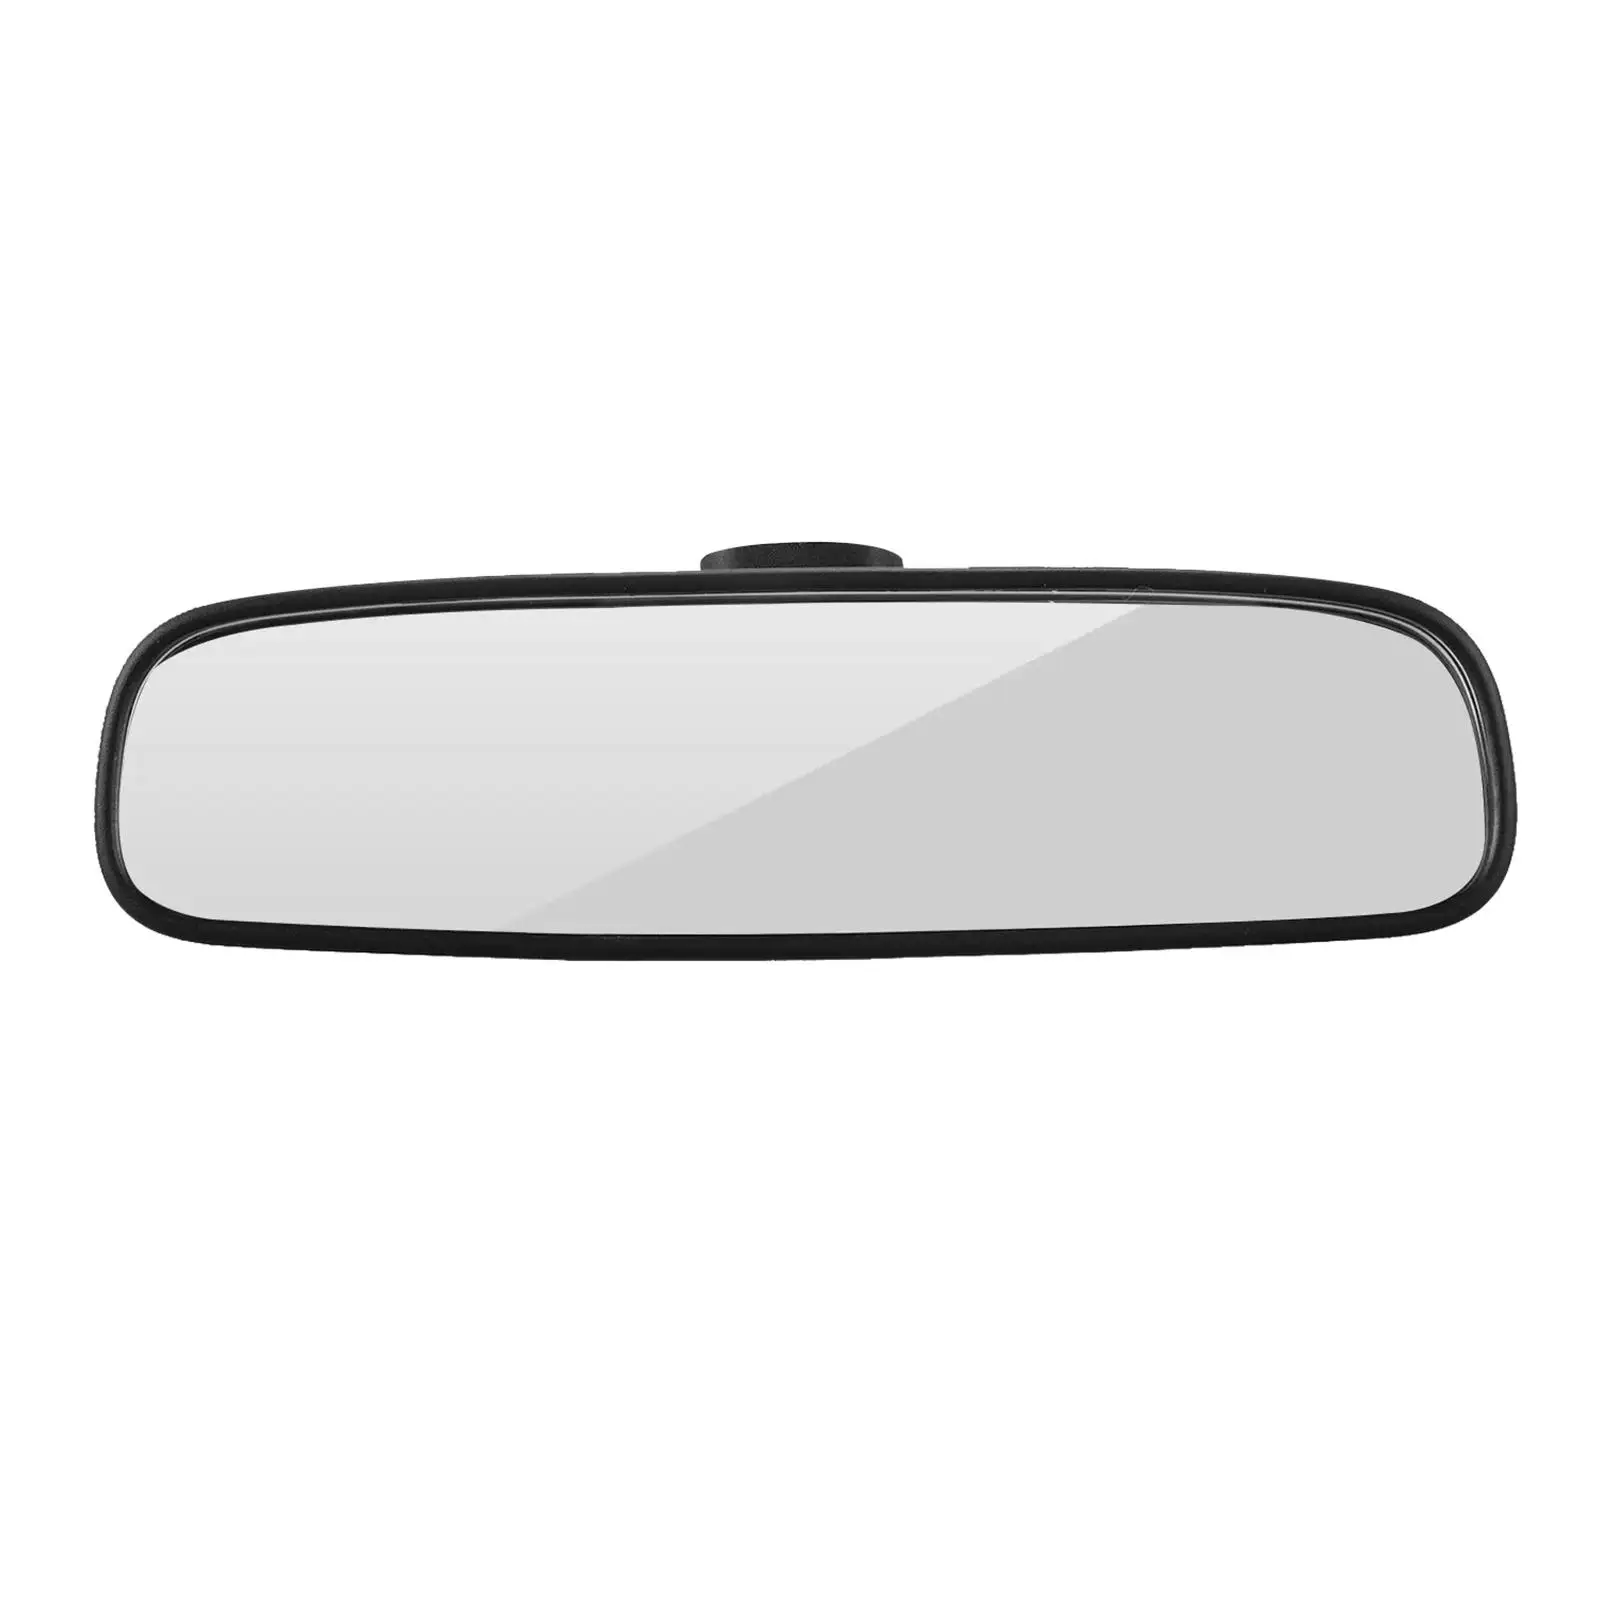 Rear View Mirror Rearview Mirror Replacement Day Night Mirror 76400-sea-004 76400-sea-305 for Honda Odyssey Fit Cr-v Accord